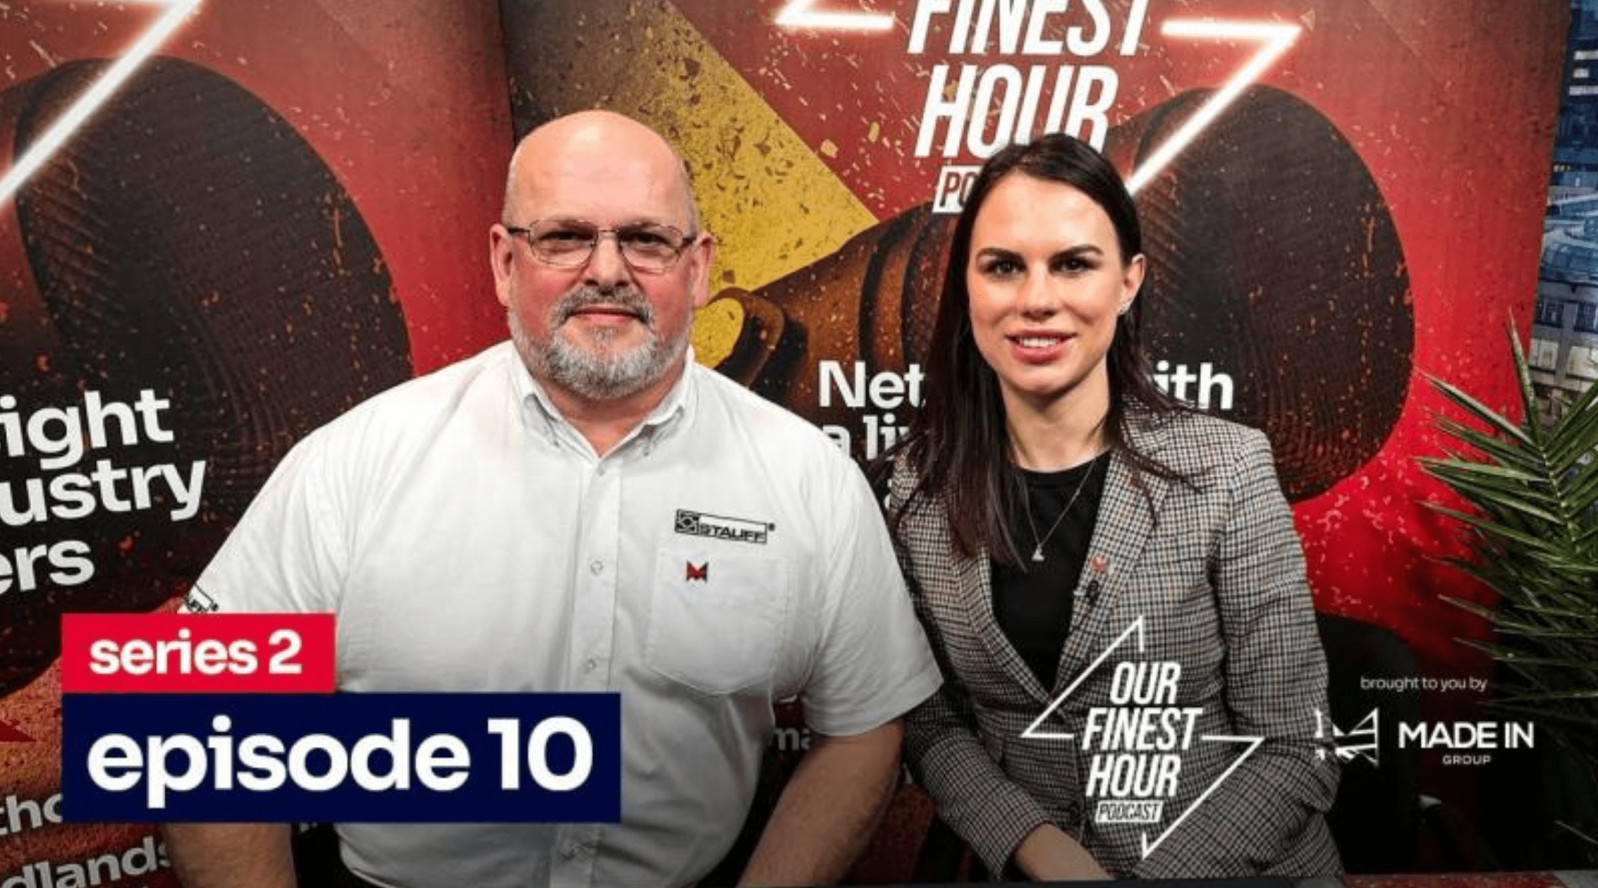 Our Finest Hour Ep. 10: From Printer to MarCom Industry Leader